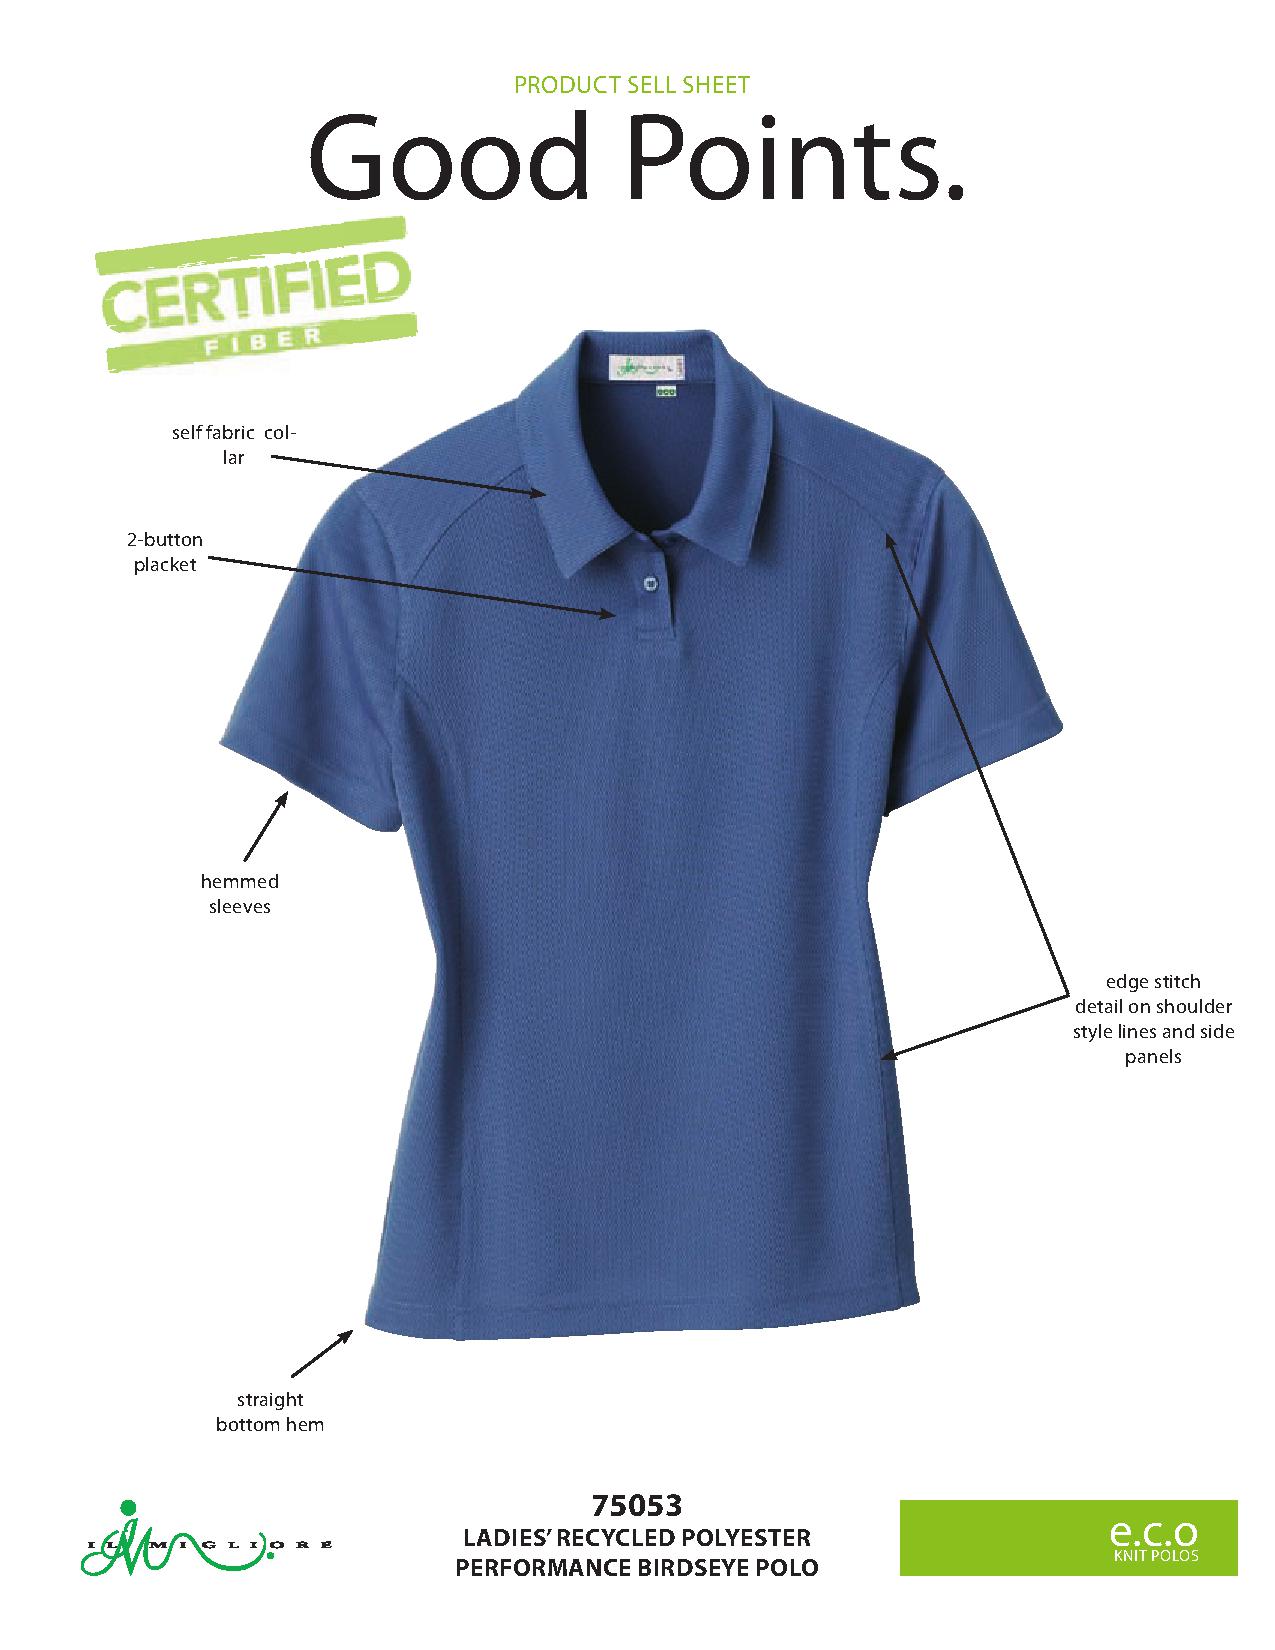 Ash City e.c.o Knits 75053 - Ladies' Recycled polyester Performance Birdseye Polo